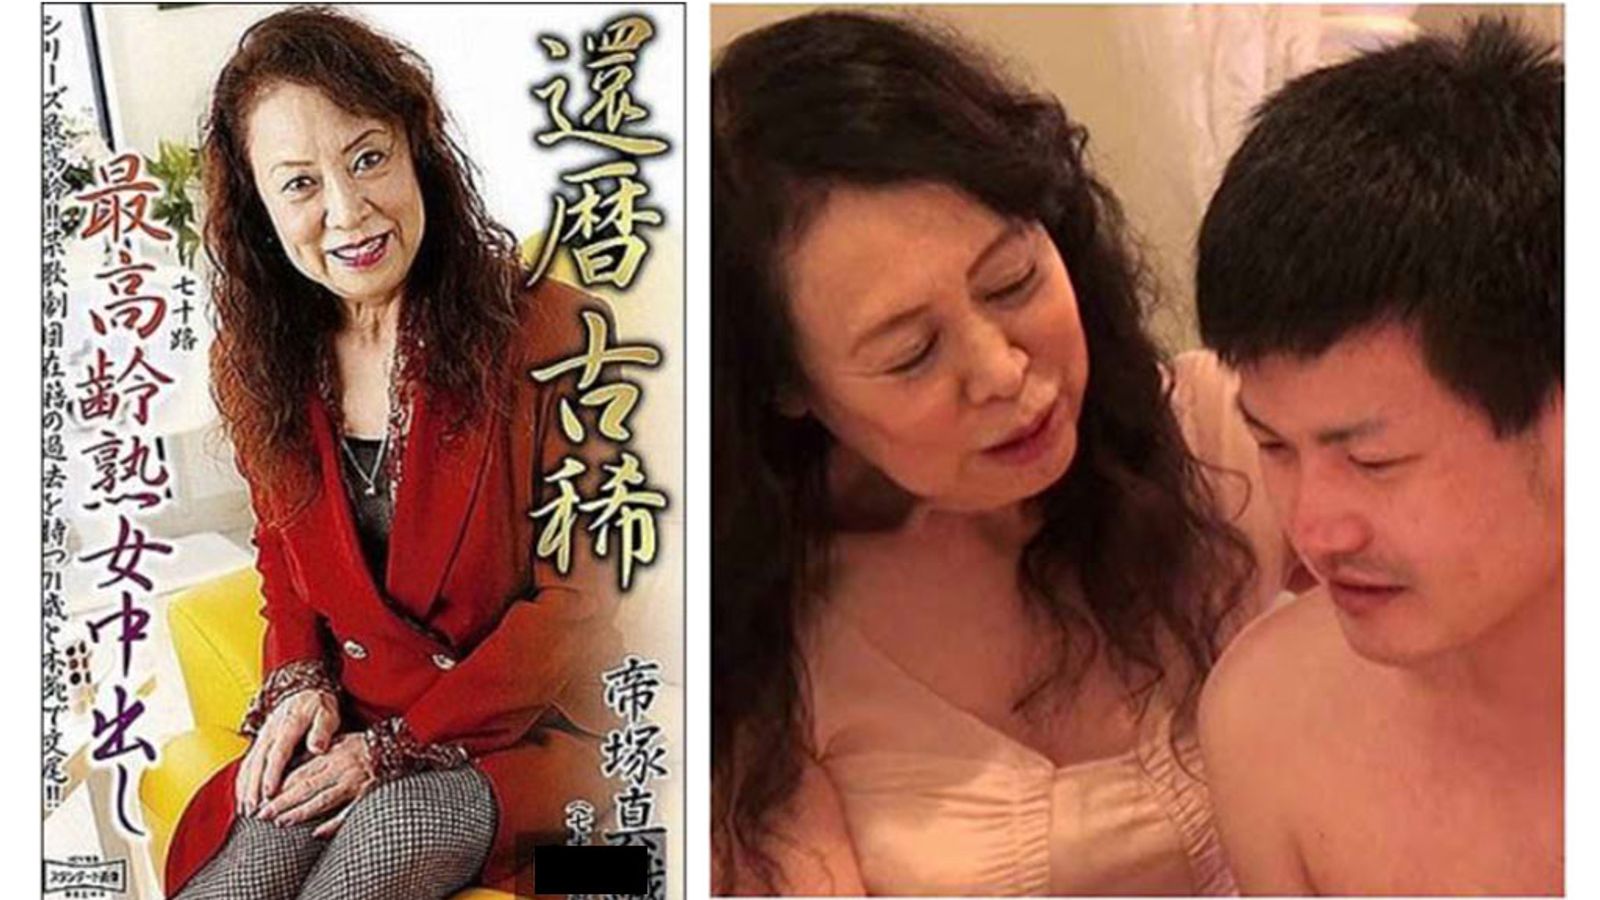 Worlds First Porn Star - Japan's (And Perhaps The World's) Oldest Porn Star Retires | AVN